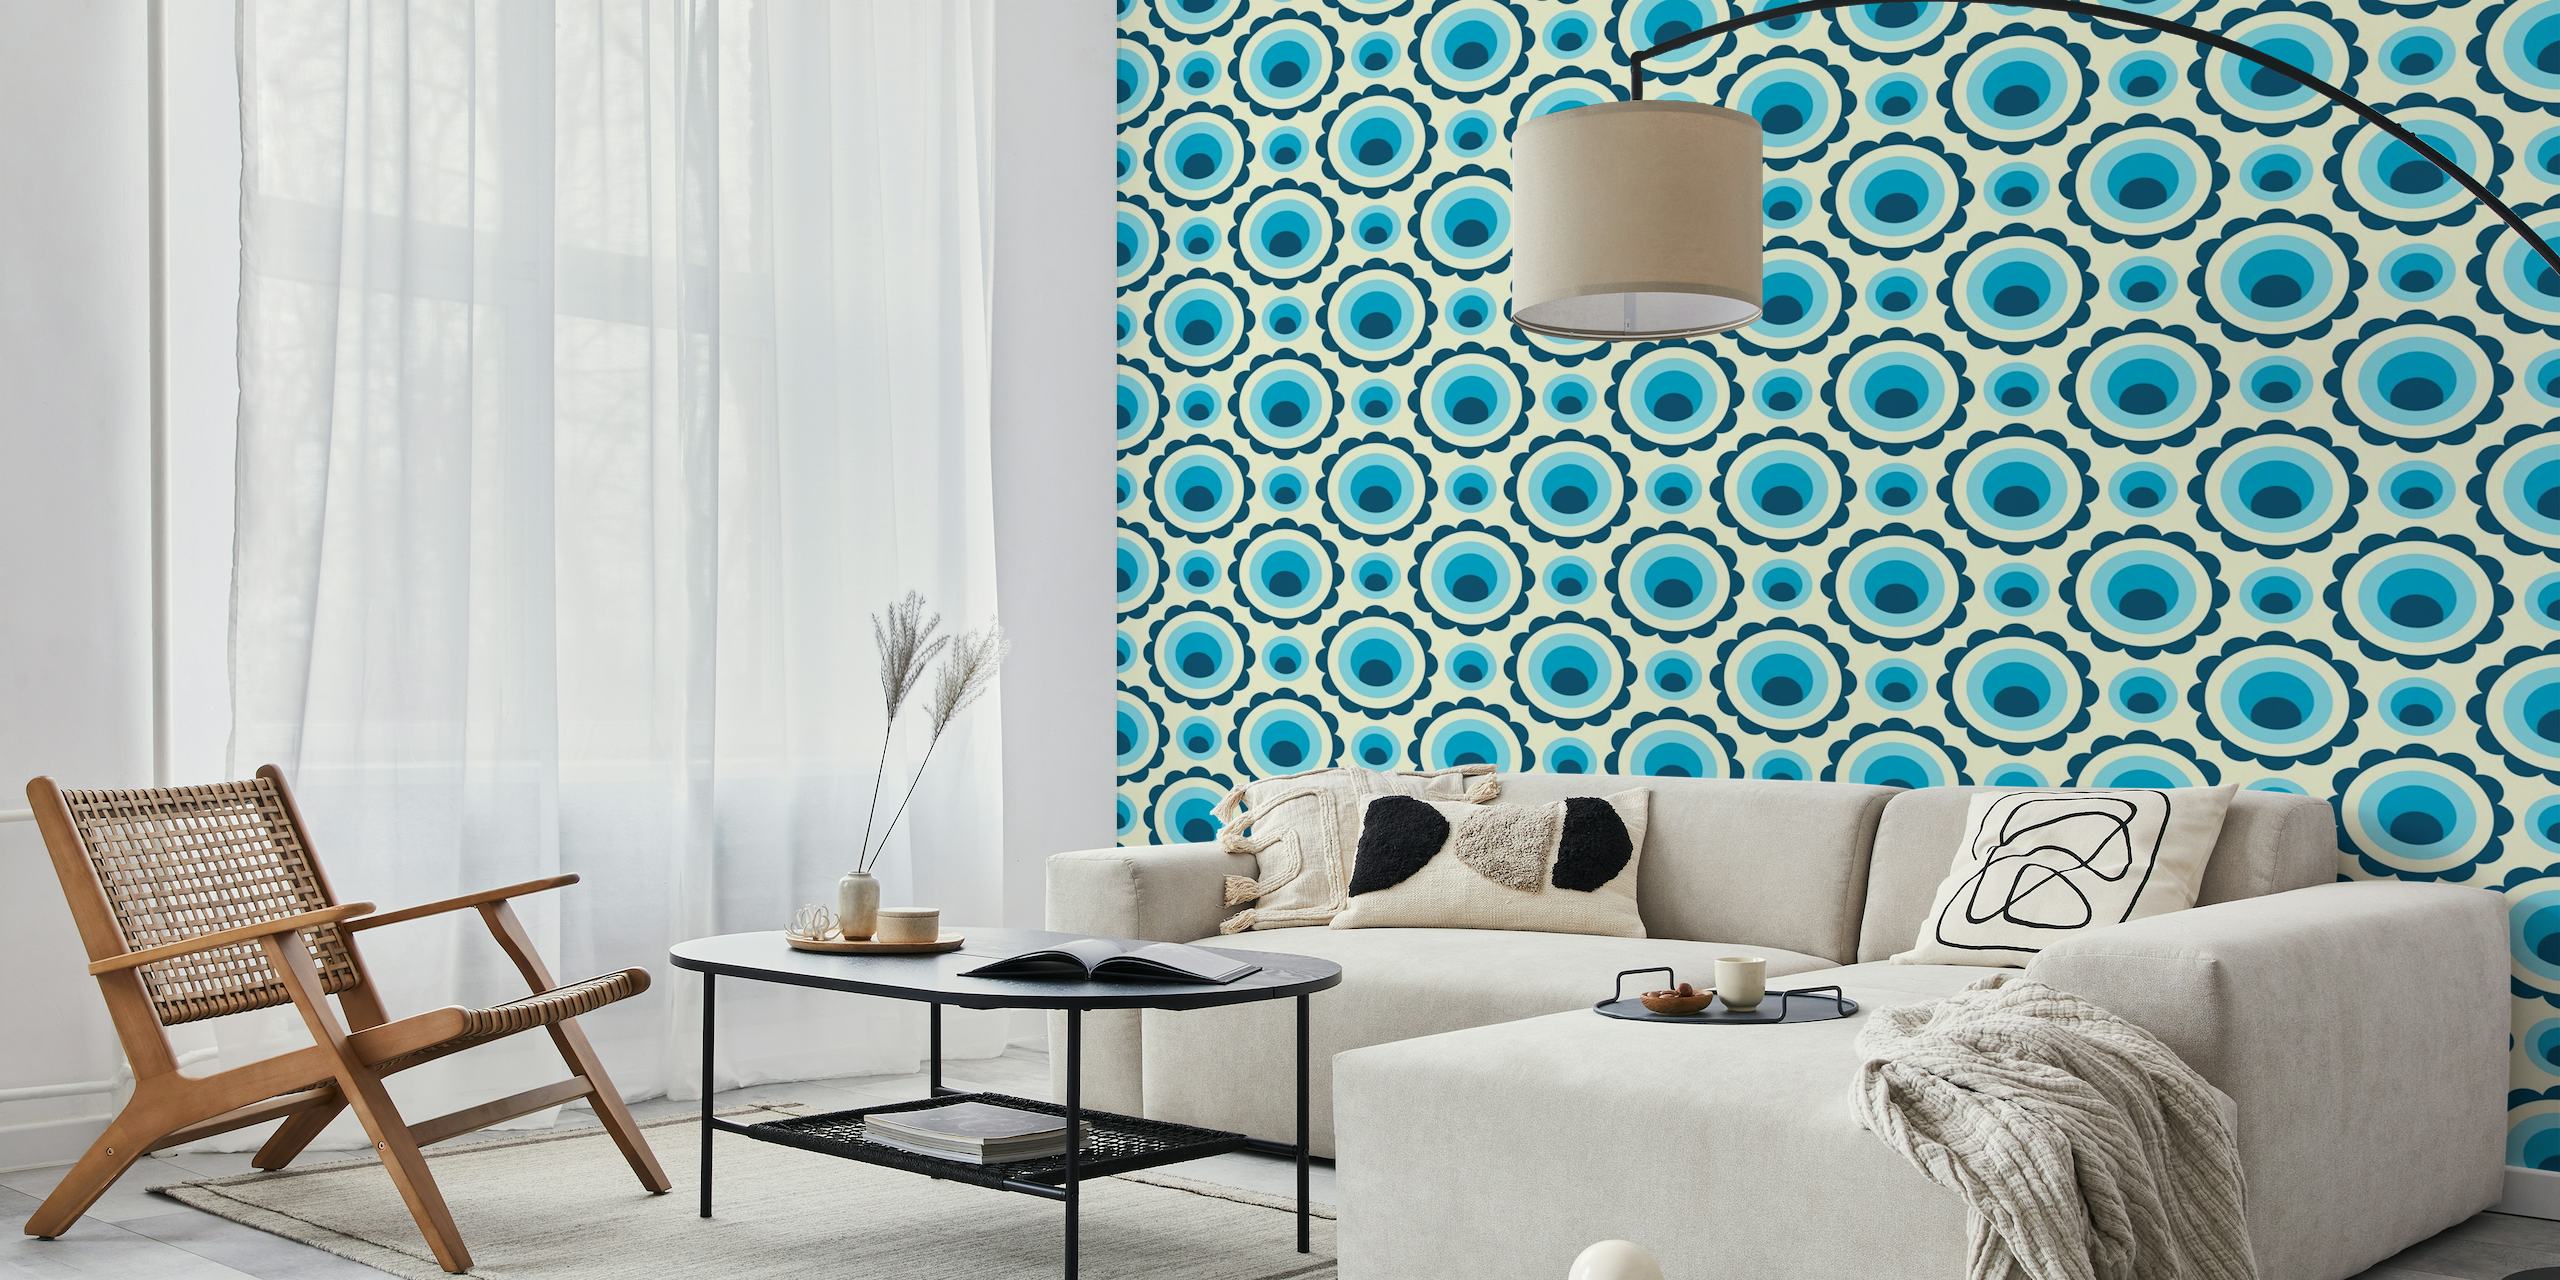 Abstract blue and beige circles in a retro pattern wall mural